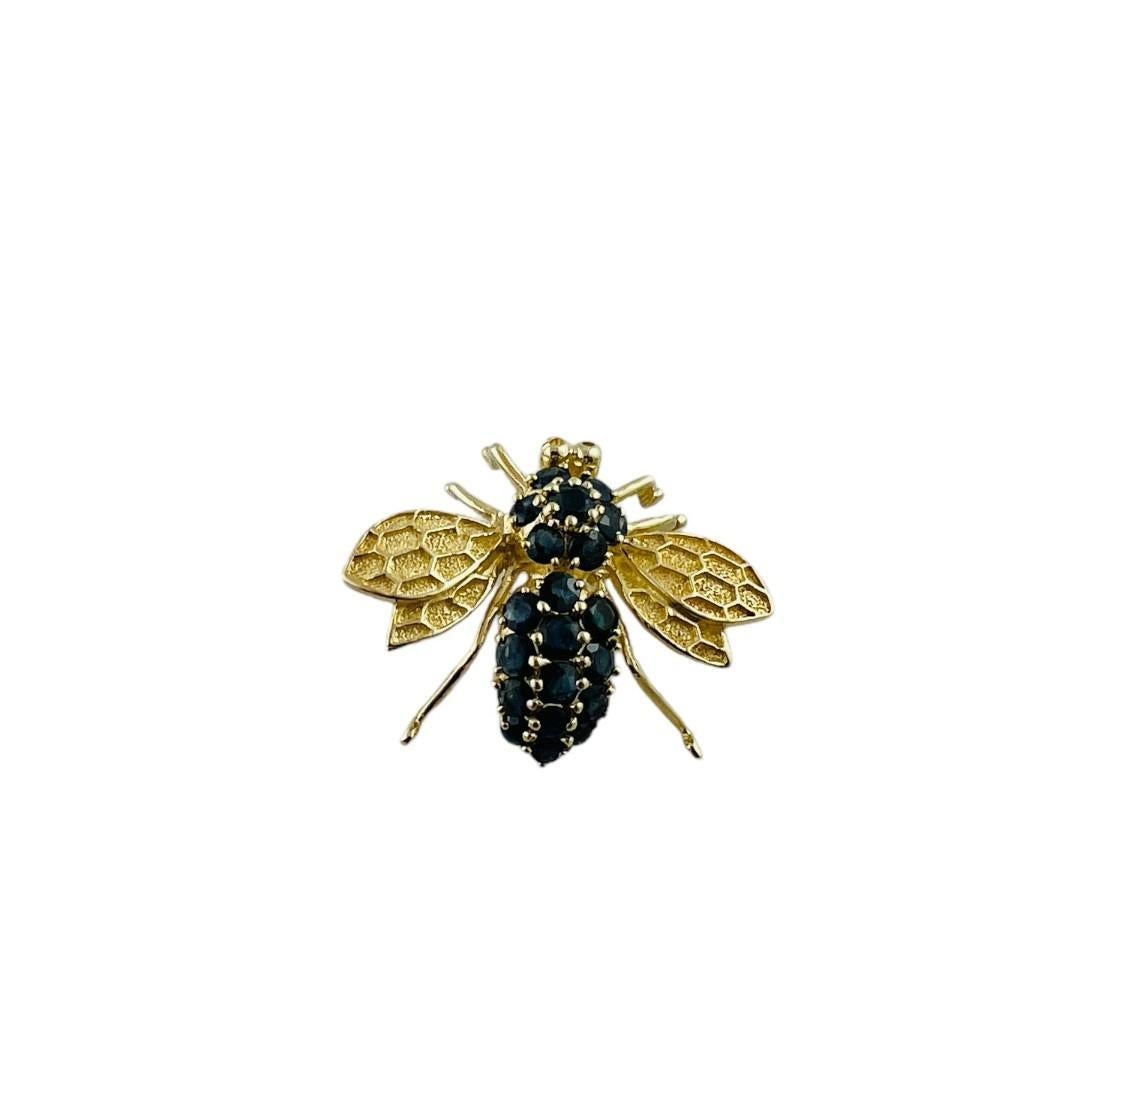 14K Yellow Gold Large Natural Sapphire Bee Brooch / Pendant

This beautiful bee can be worn as a brooch or a pendant.

The brooch is set in 14K yellow gold with 20 dark blue natural sapphires

24.9. x 31.7 x 12.3 mm

6.3 g / 4.0 dwt

Stamped 14K 585